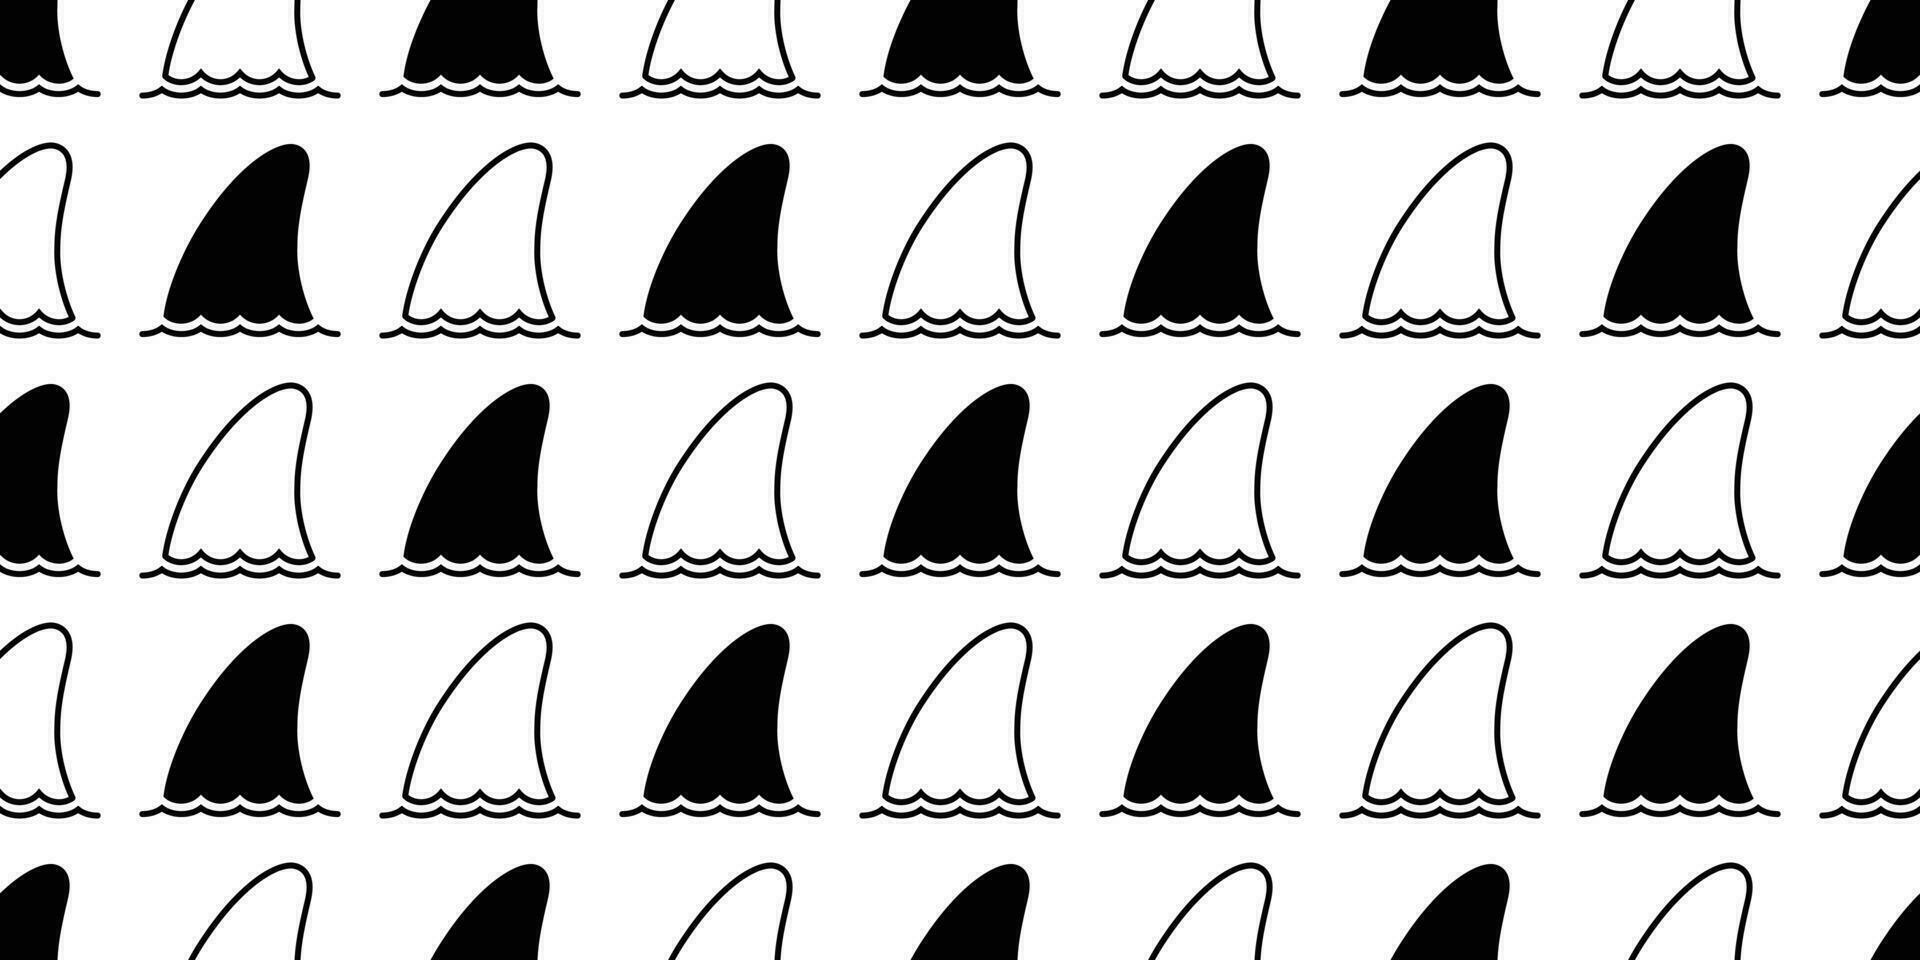 shark fin seamless pattern vector dolphin fish whale scarf isolated repeat wallpaper tile background animal cartoon illustration ocean sea design